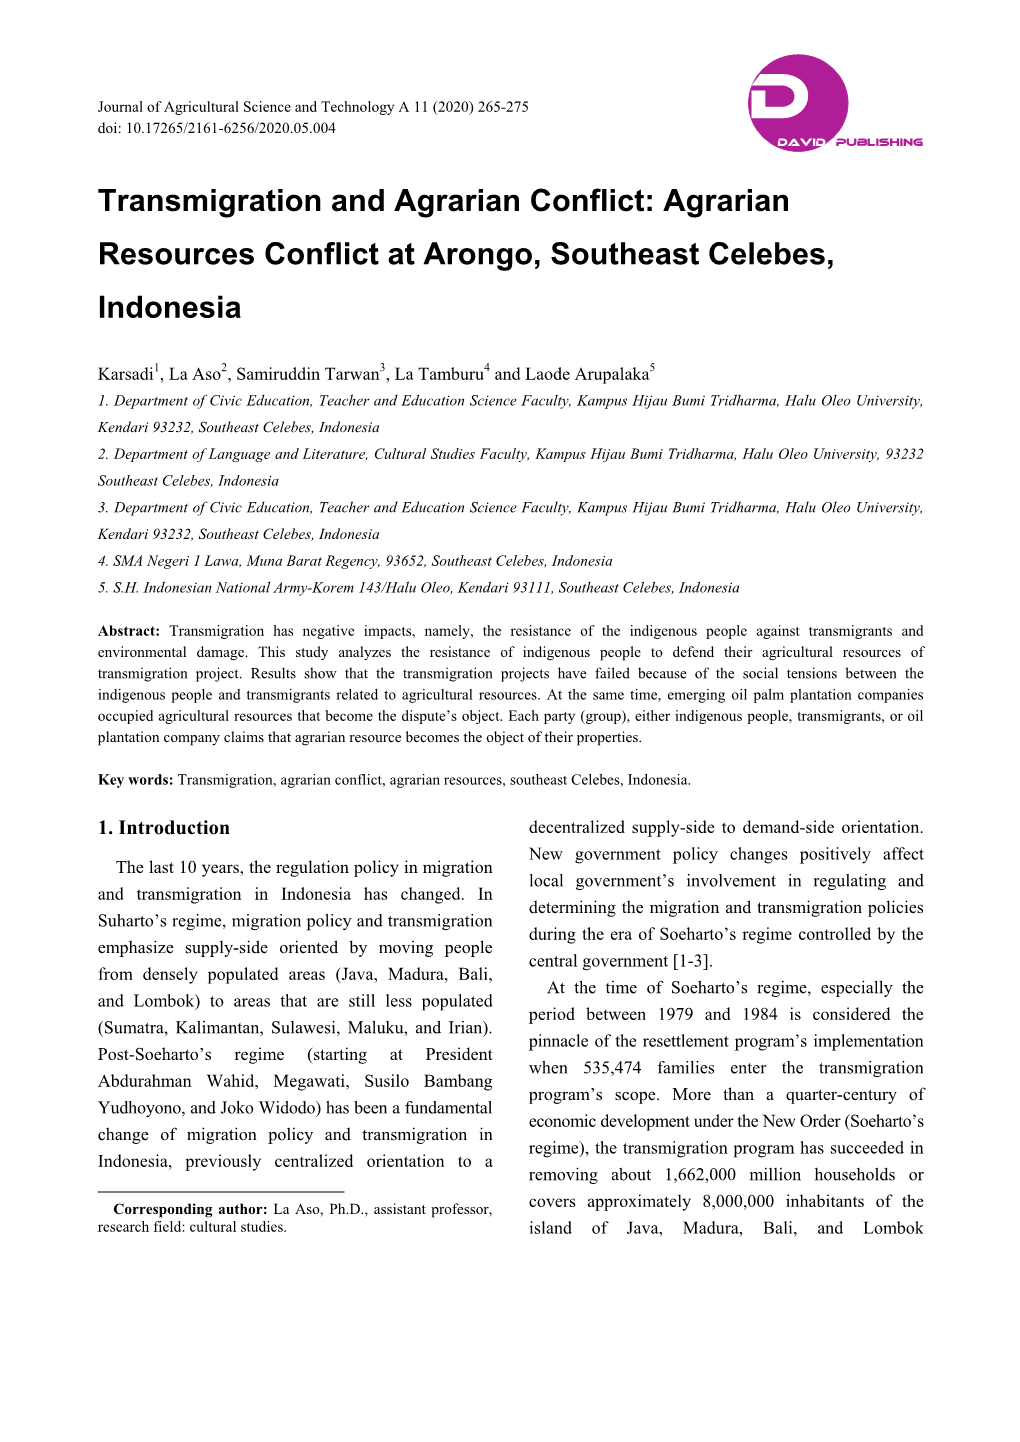 Agrarian Resources Conflict at Arongo, Southeast Celebes, Indonesia